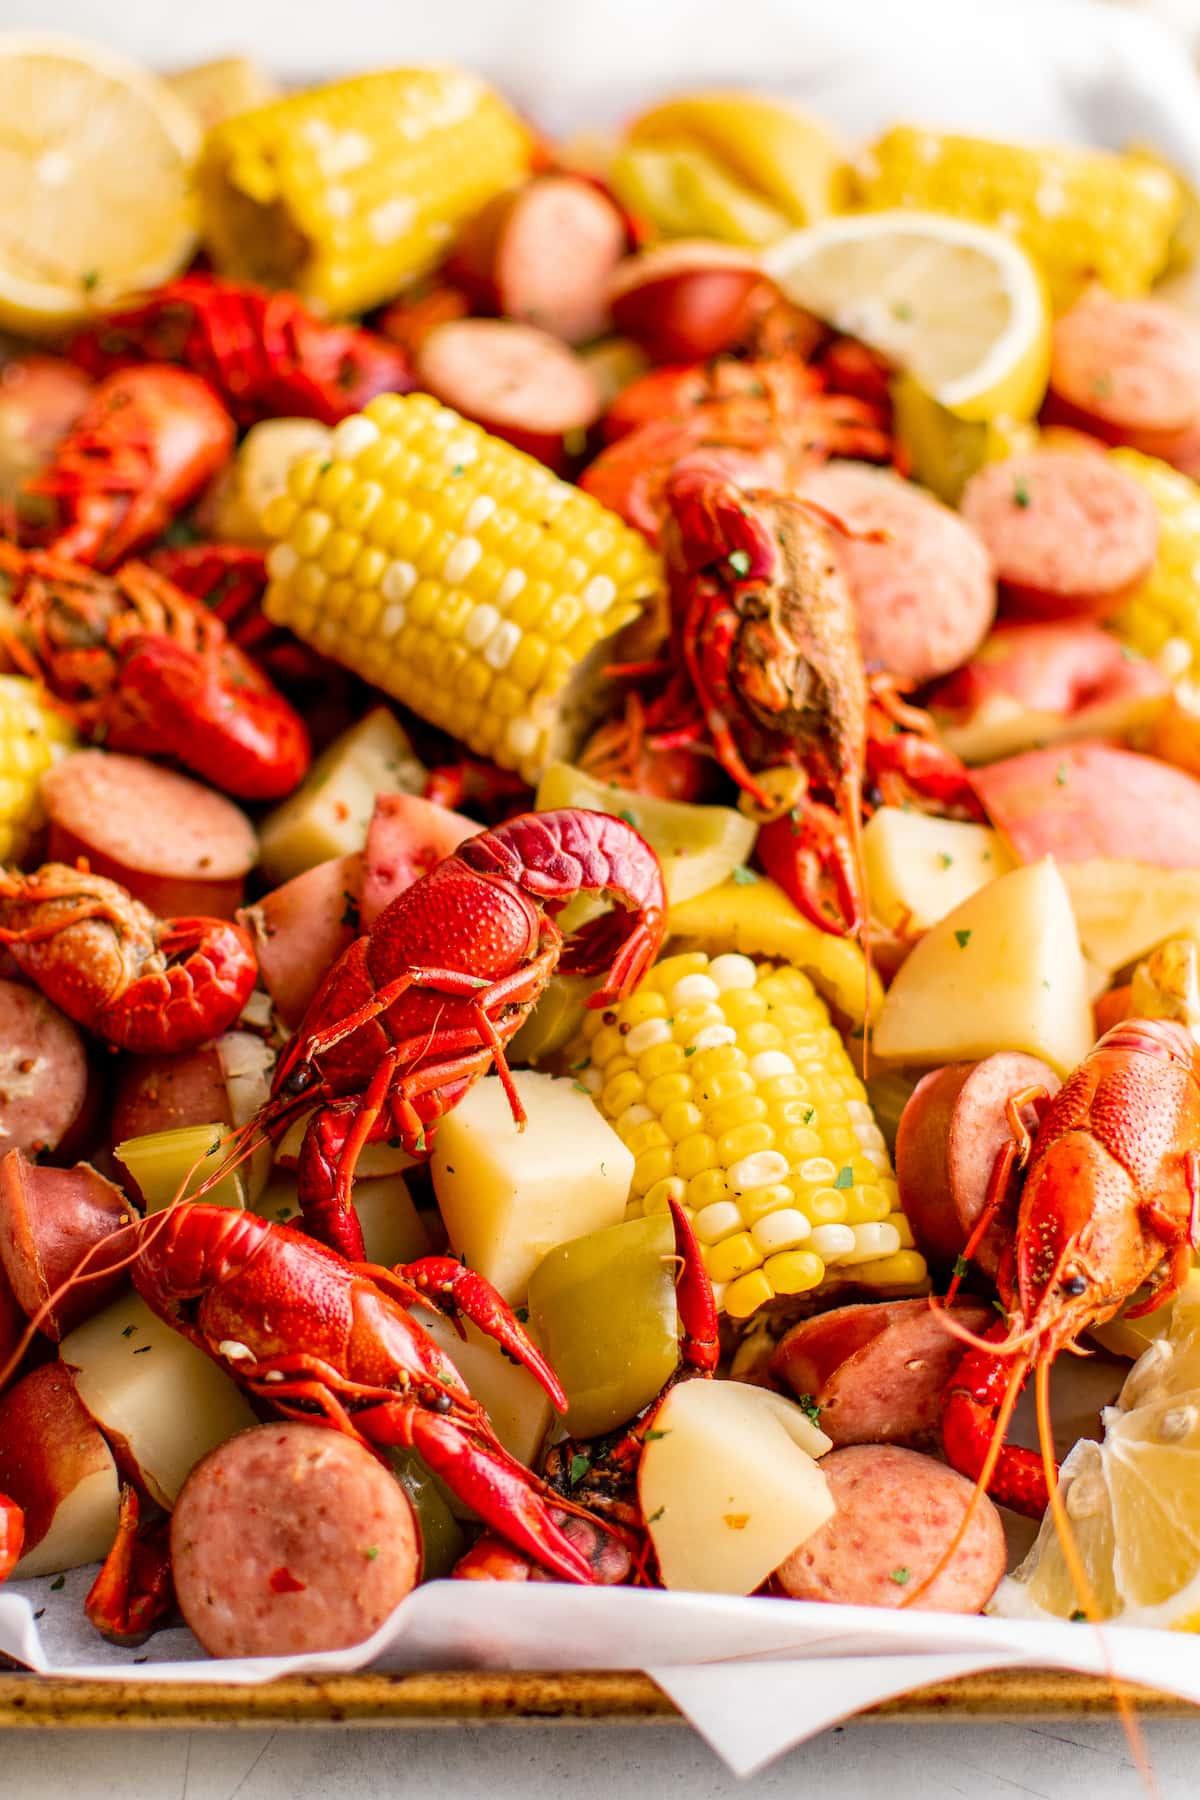 Crawfish, corn, potatoes, onion and more on a sheet pan lined with parchment paper.